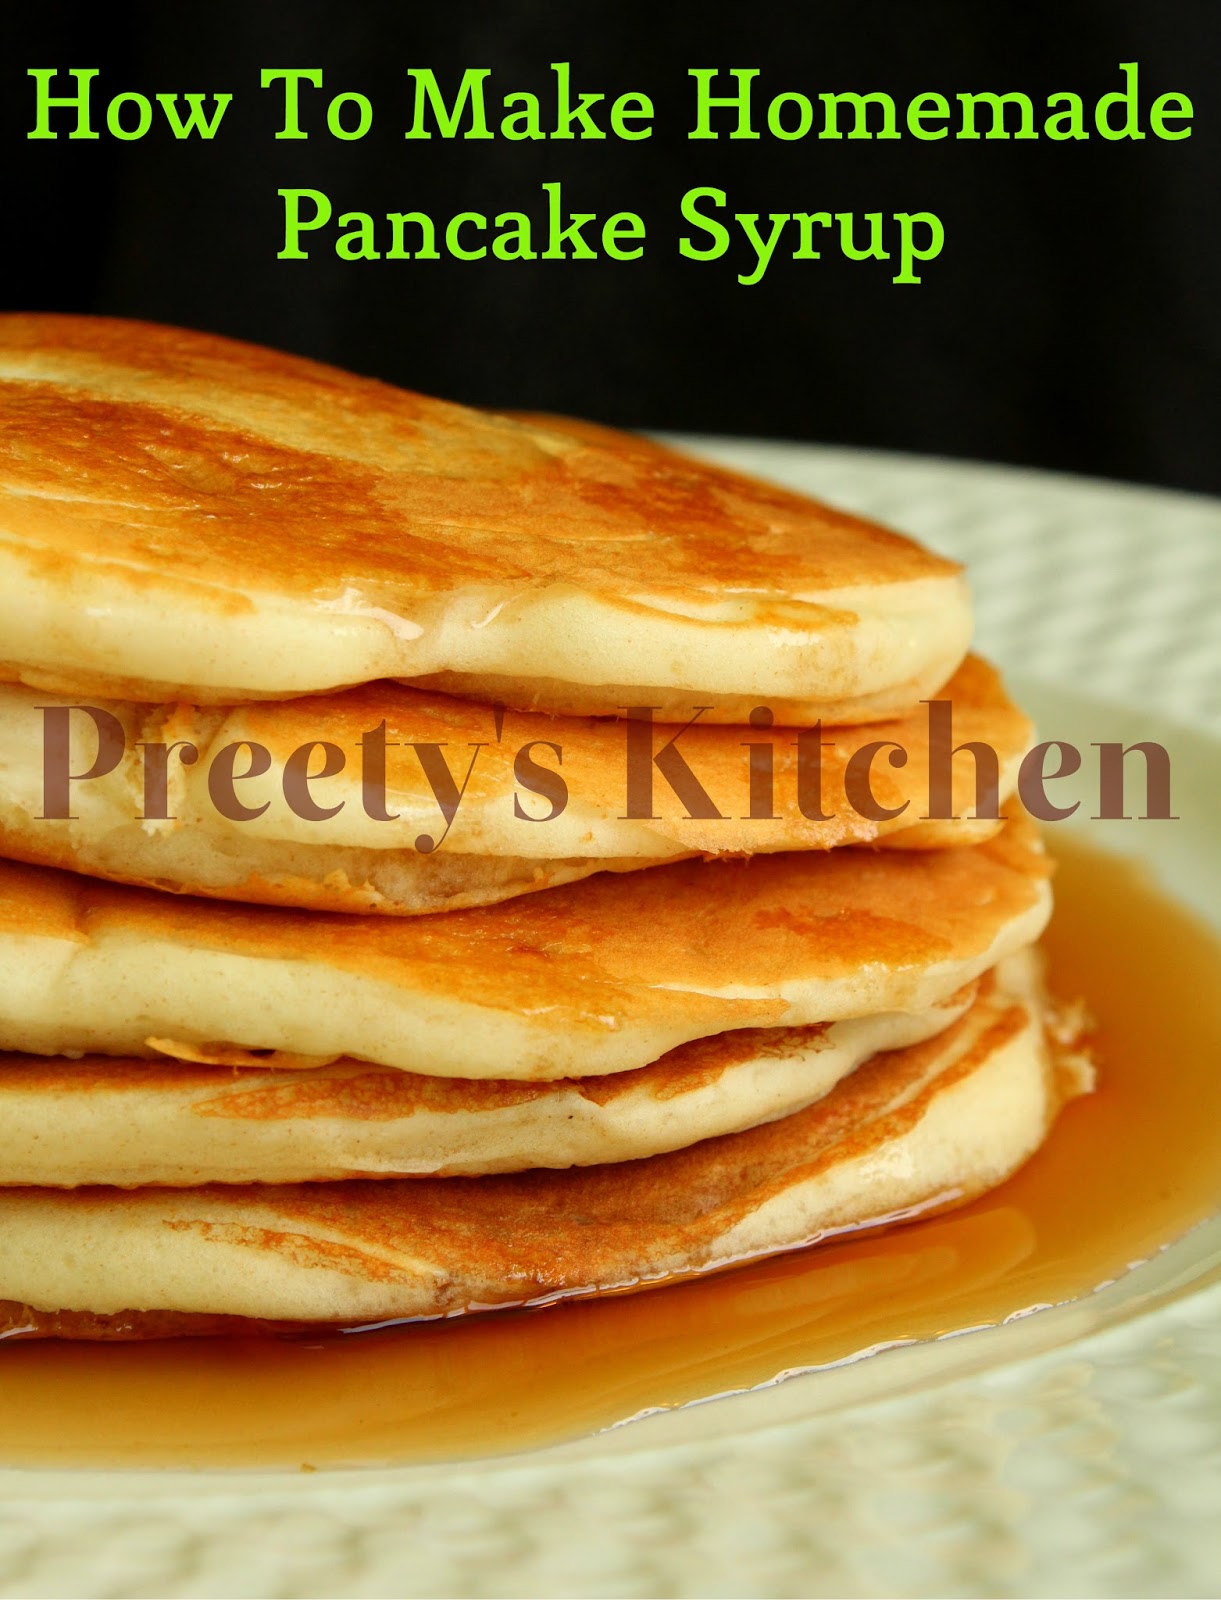 syrup To Preety's Easy from how sugar  Homemade Pancake  to  ( Super Kitchen: pancake Syrup Make How make